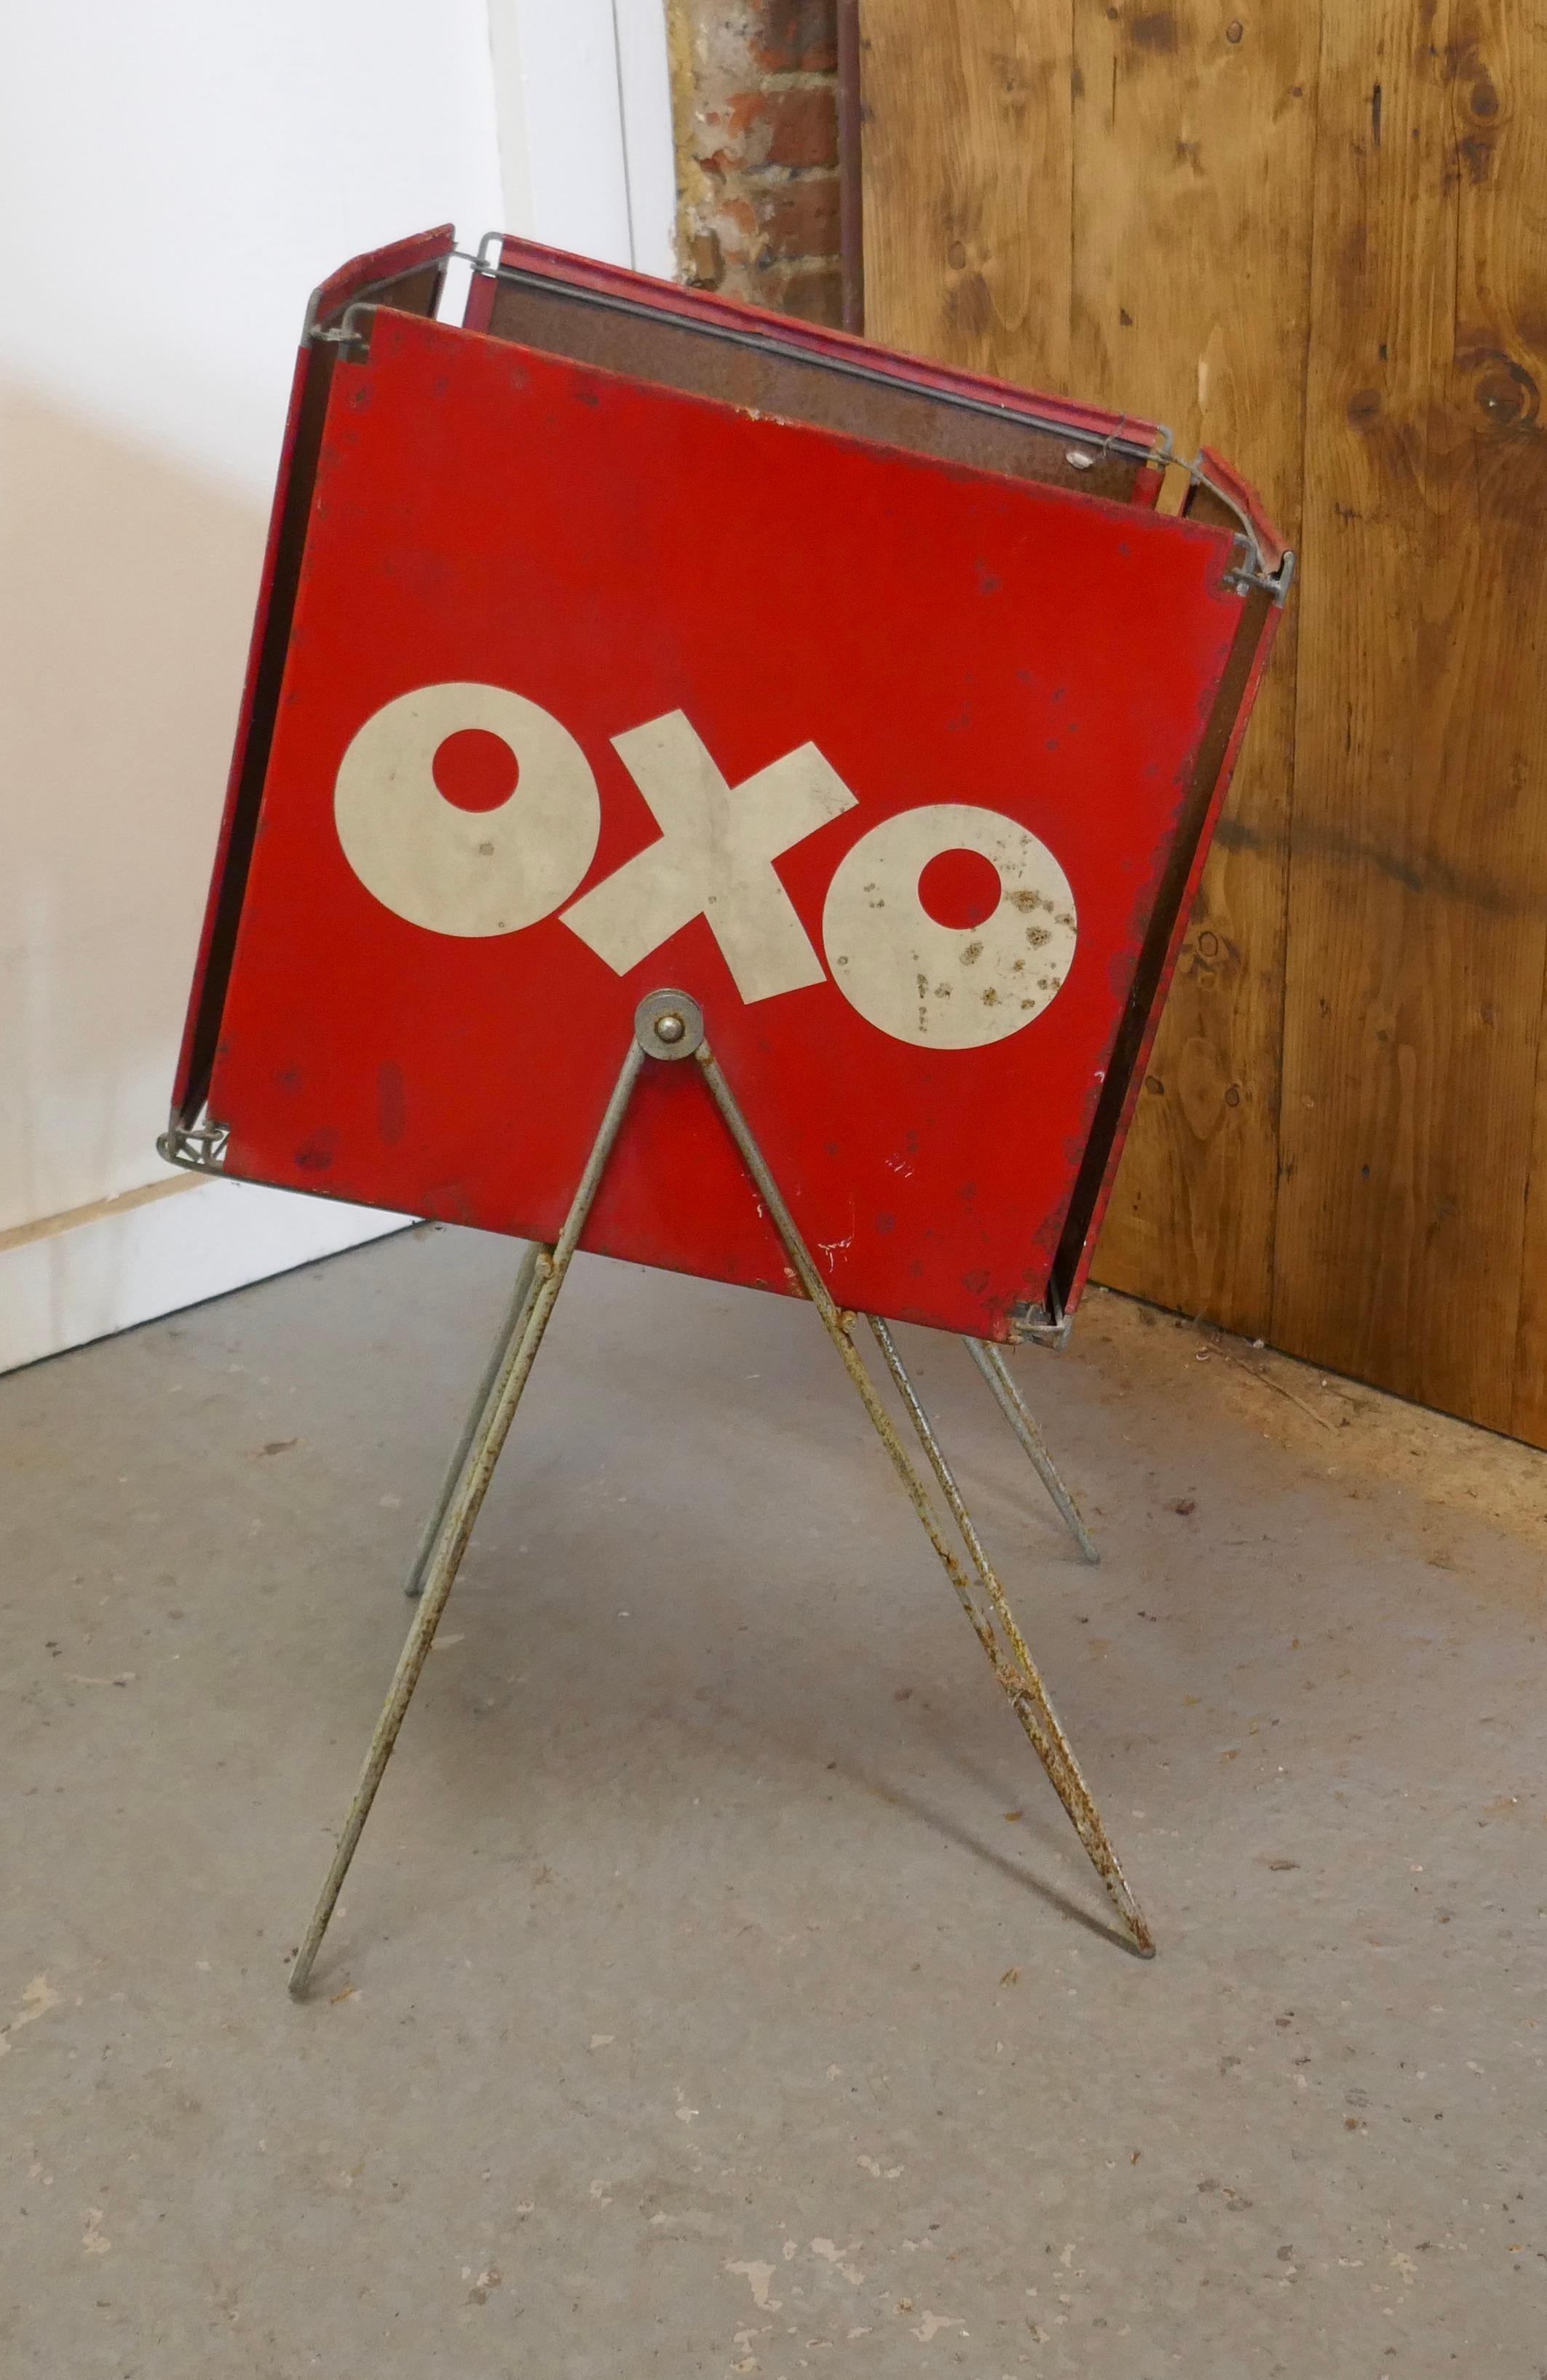 Oxo Cube Tin Shop Display Dispenser In Good Condition For Sale In Chillerton, Isle of Wight